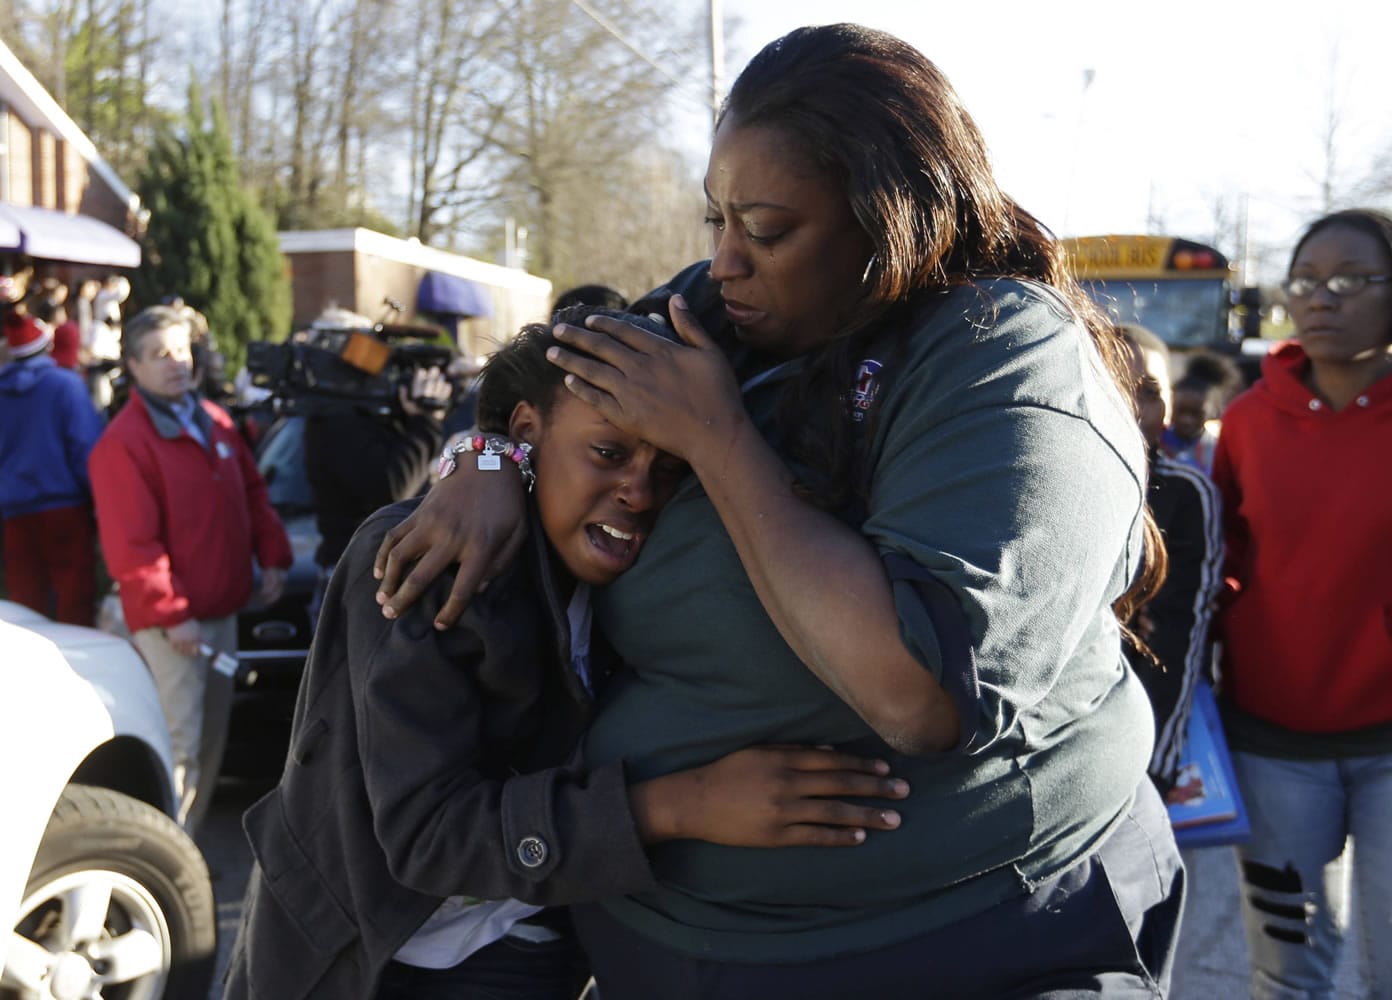 A woman comforts a child after after a shooting at Price Middle school in Atlanta on Thursday. A 14-year-old boy was wounded outside the school Thursday afternoon and a fellow student was in custody as a suspect, authorities said.